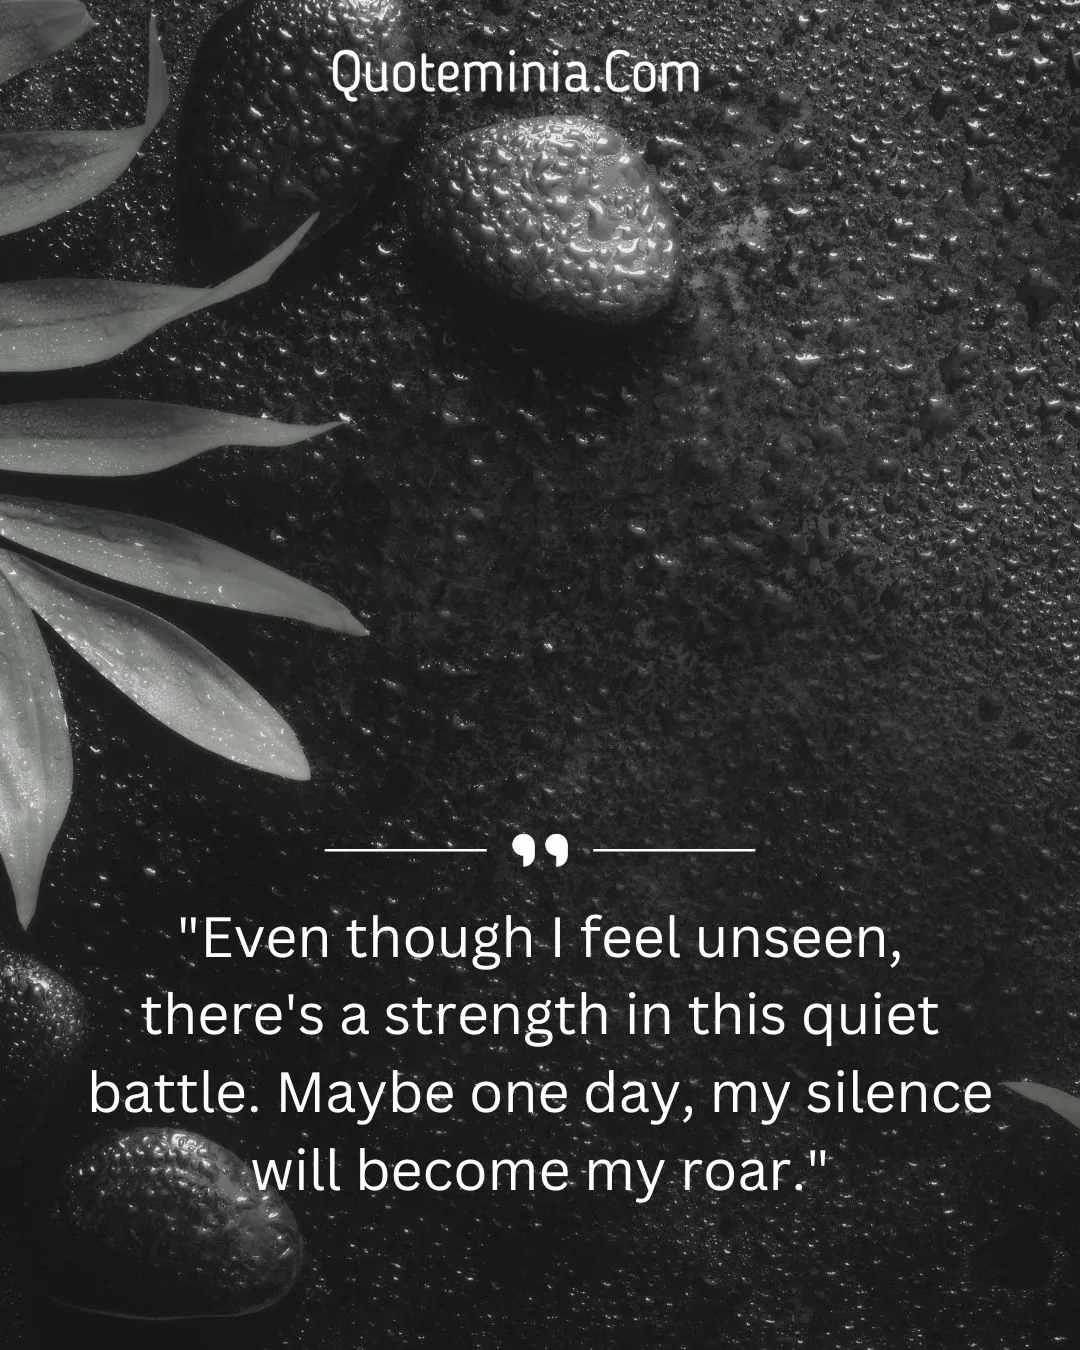 Suffering in Silence Depression Quotes Image 3